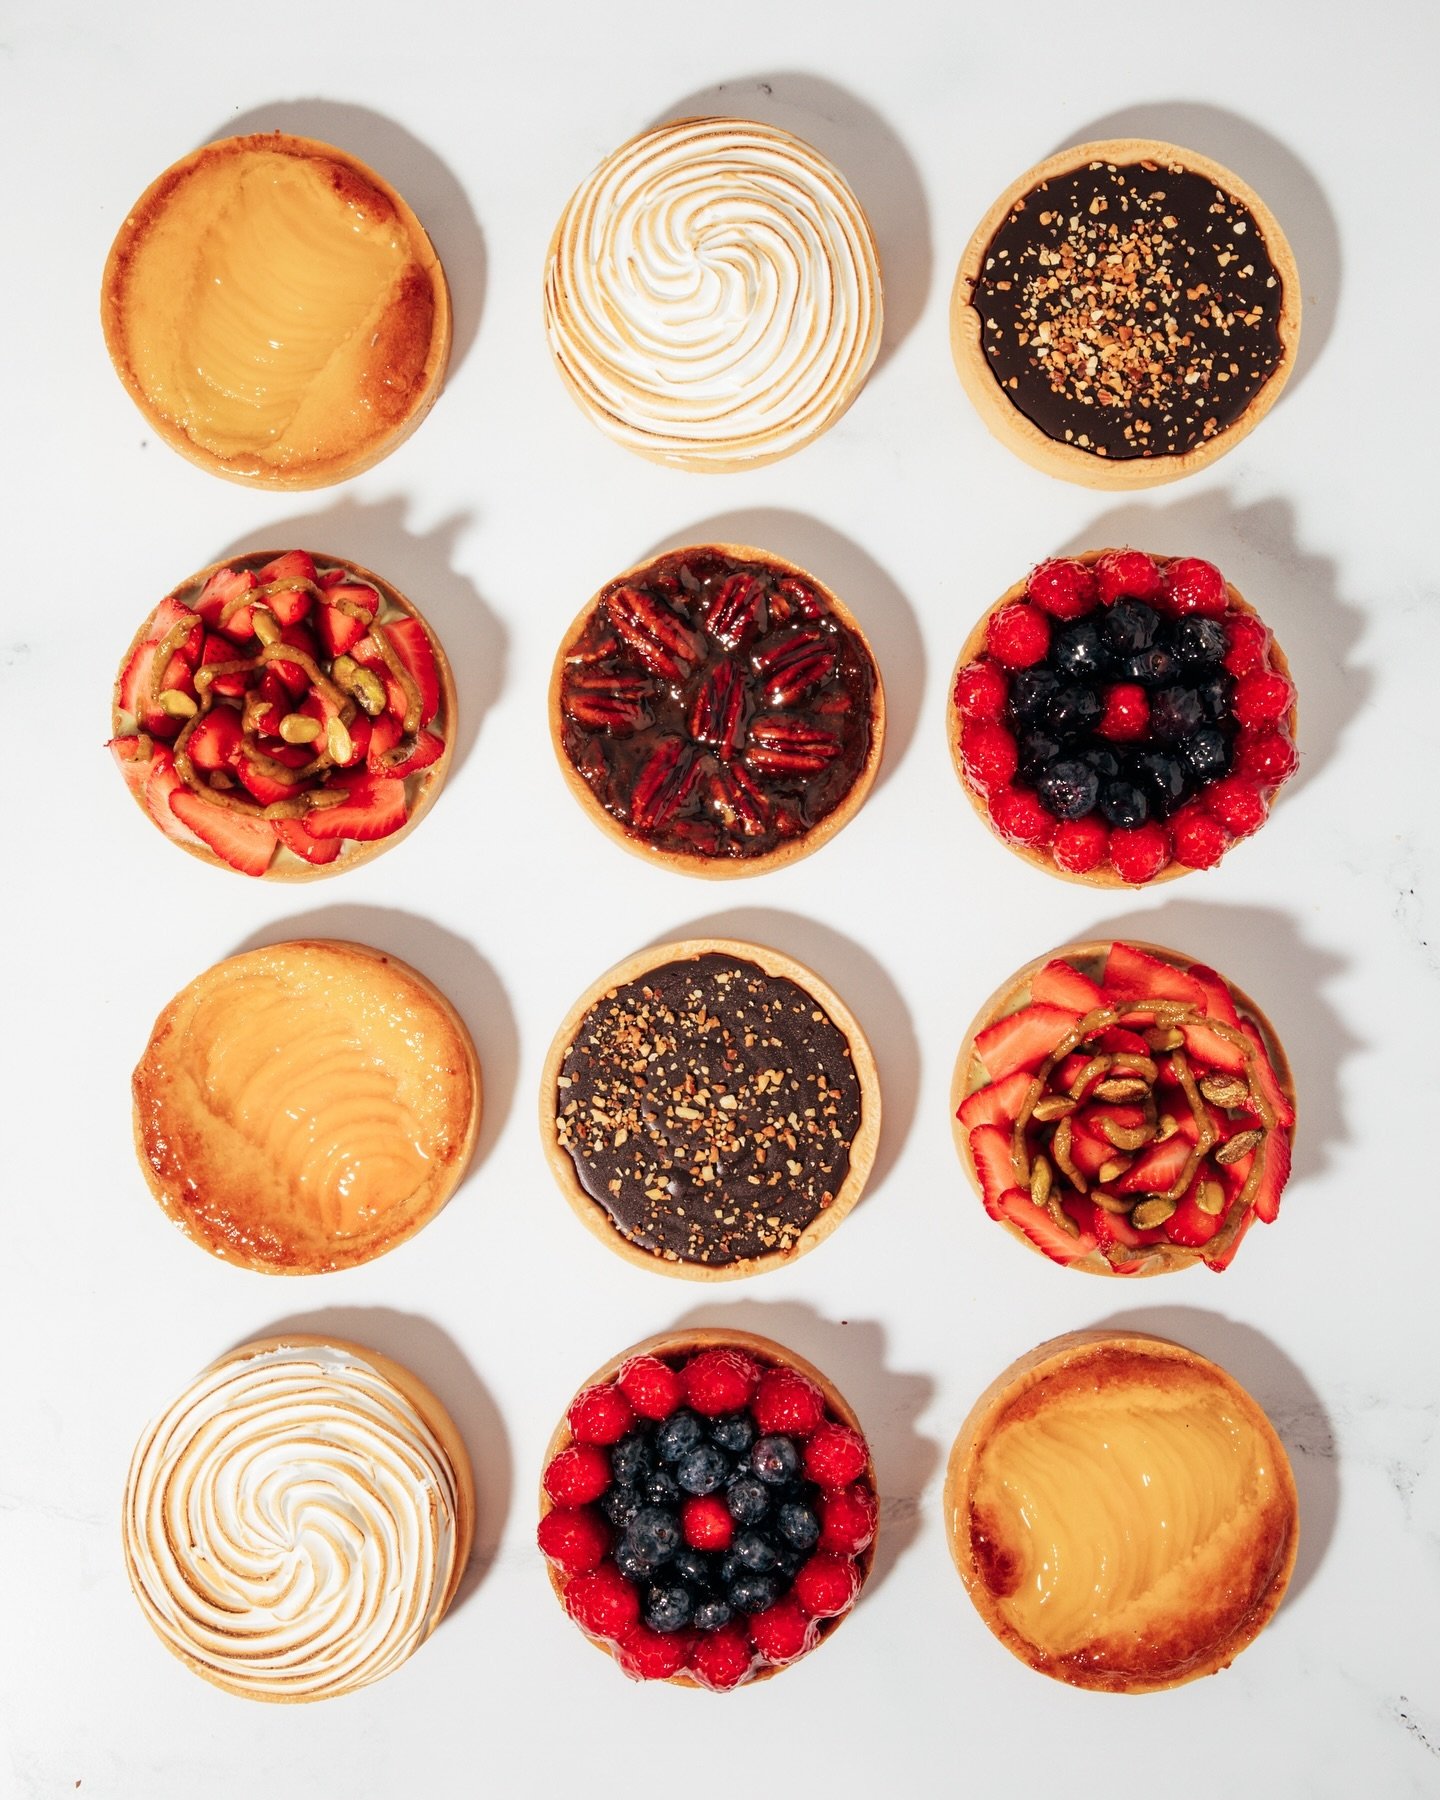 Sunshine and sweets! ☀️ Our tart selection is your perfect treat for the sunny weather. From zesty Lemon Meringue to lush Mixed Berry, decadent Chocolate, sweet Pecan, fresh Pear, juicy Peach, and vibrant Strawberry&mdash;there&rsquo;s a flavor for e